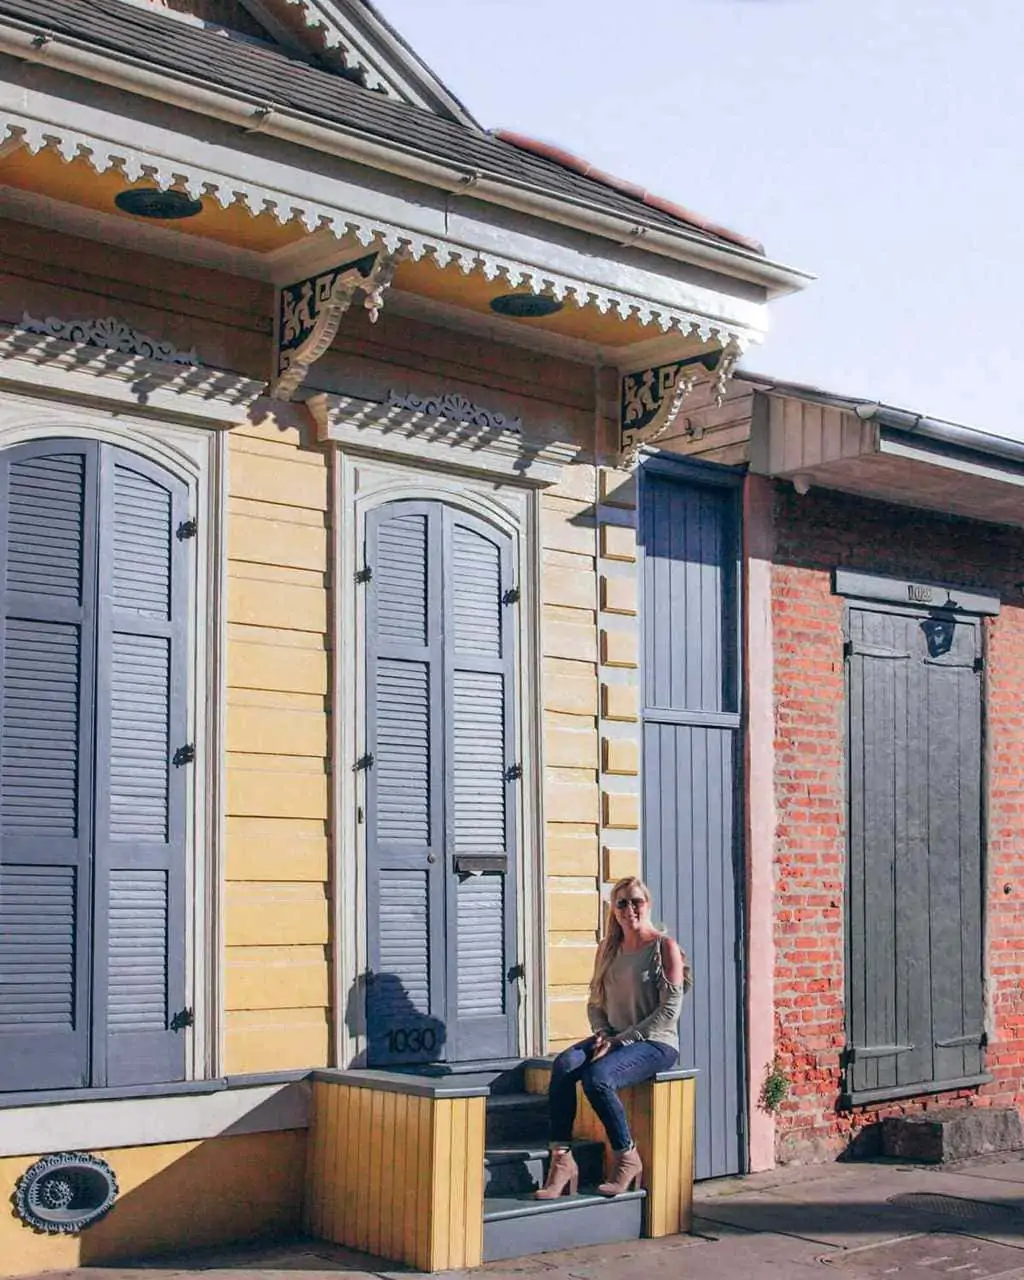 Woman sitting on steps in French Quarter in New Orleans